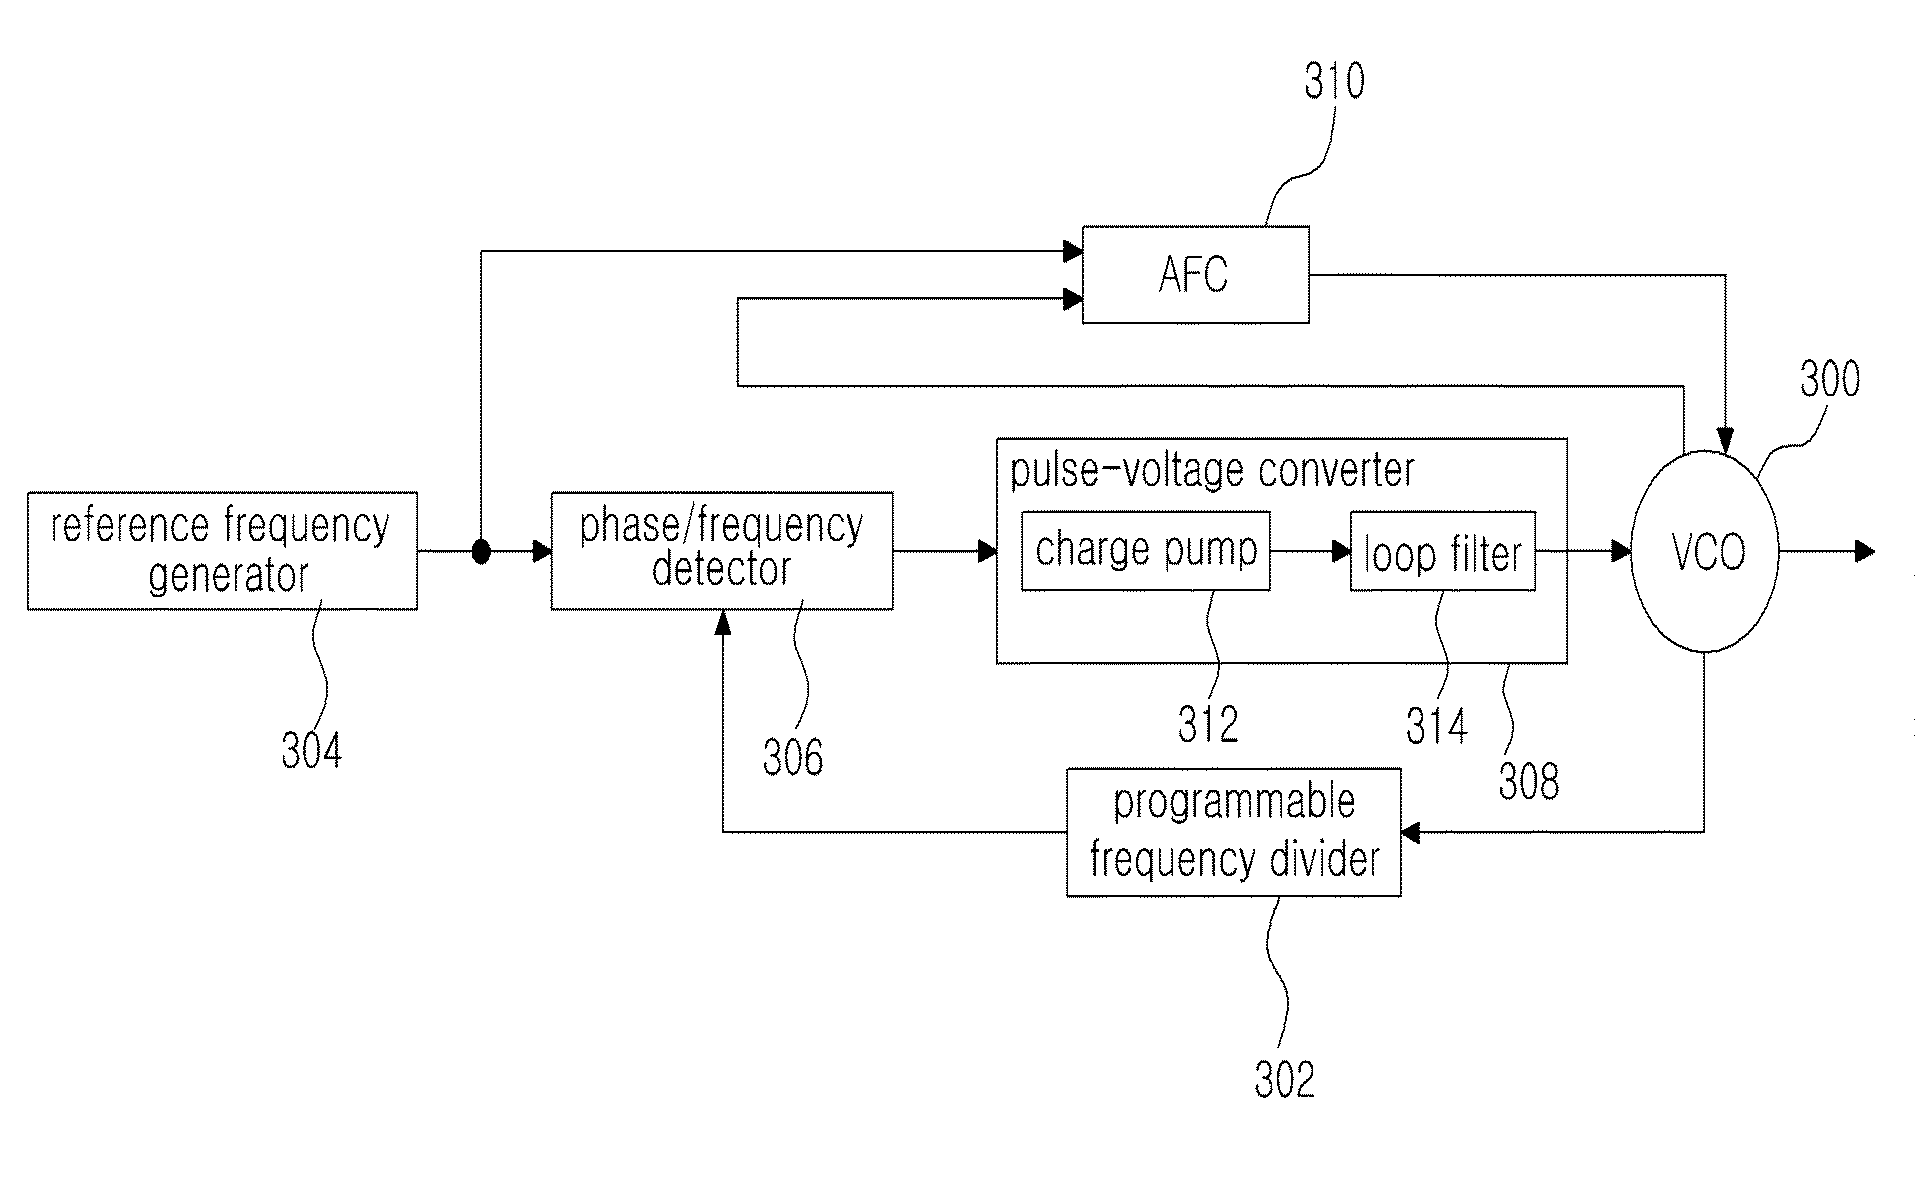 Automatic frequency calibration apparatus and method for a phase-locked loop based frequency synthesizer